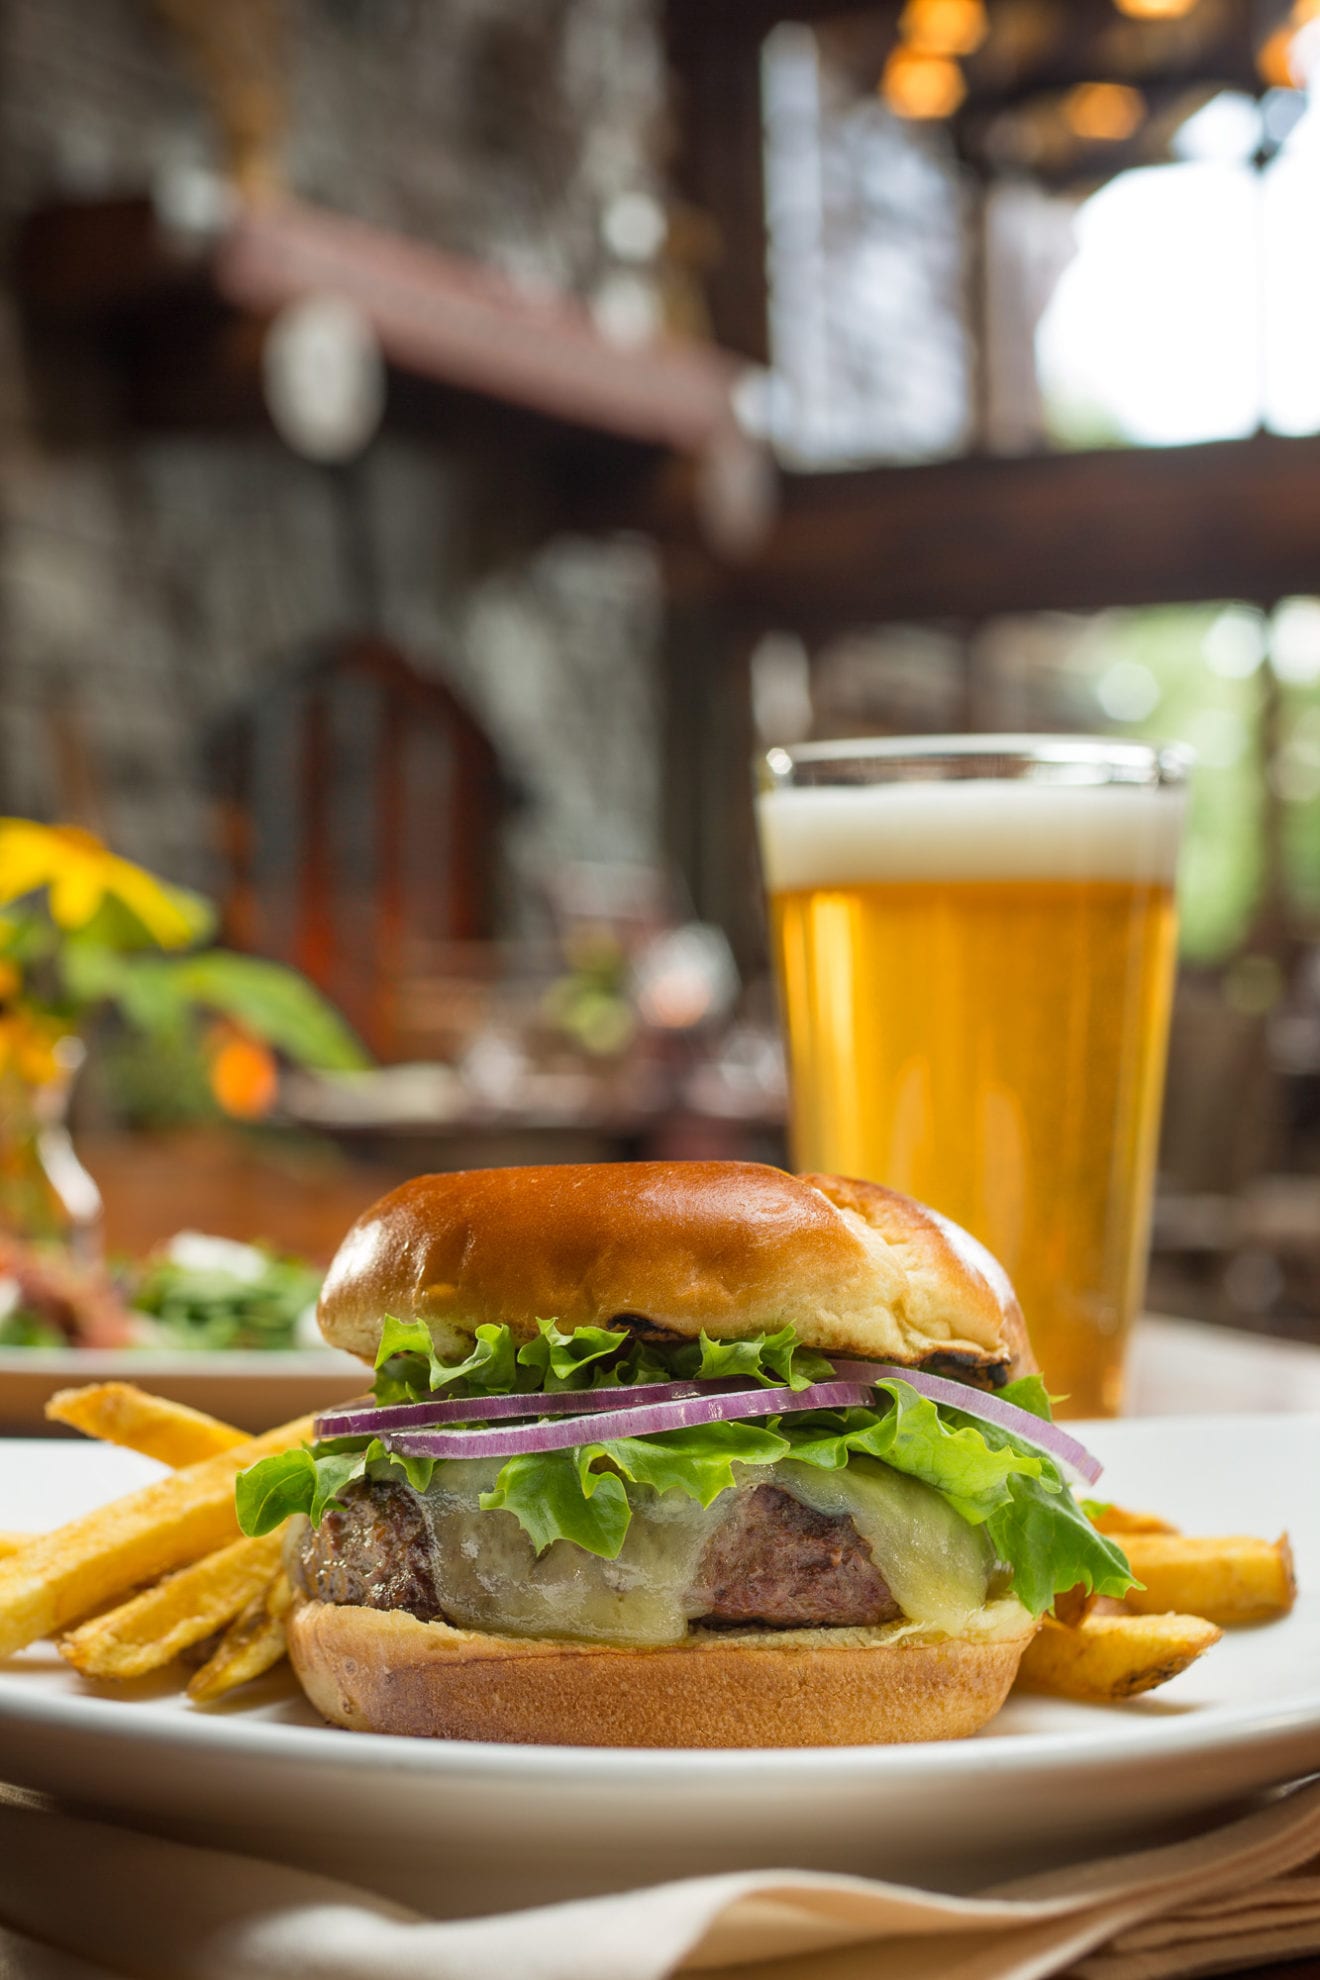 Hamburger, fries and a glass of beer.